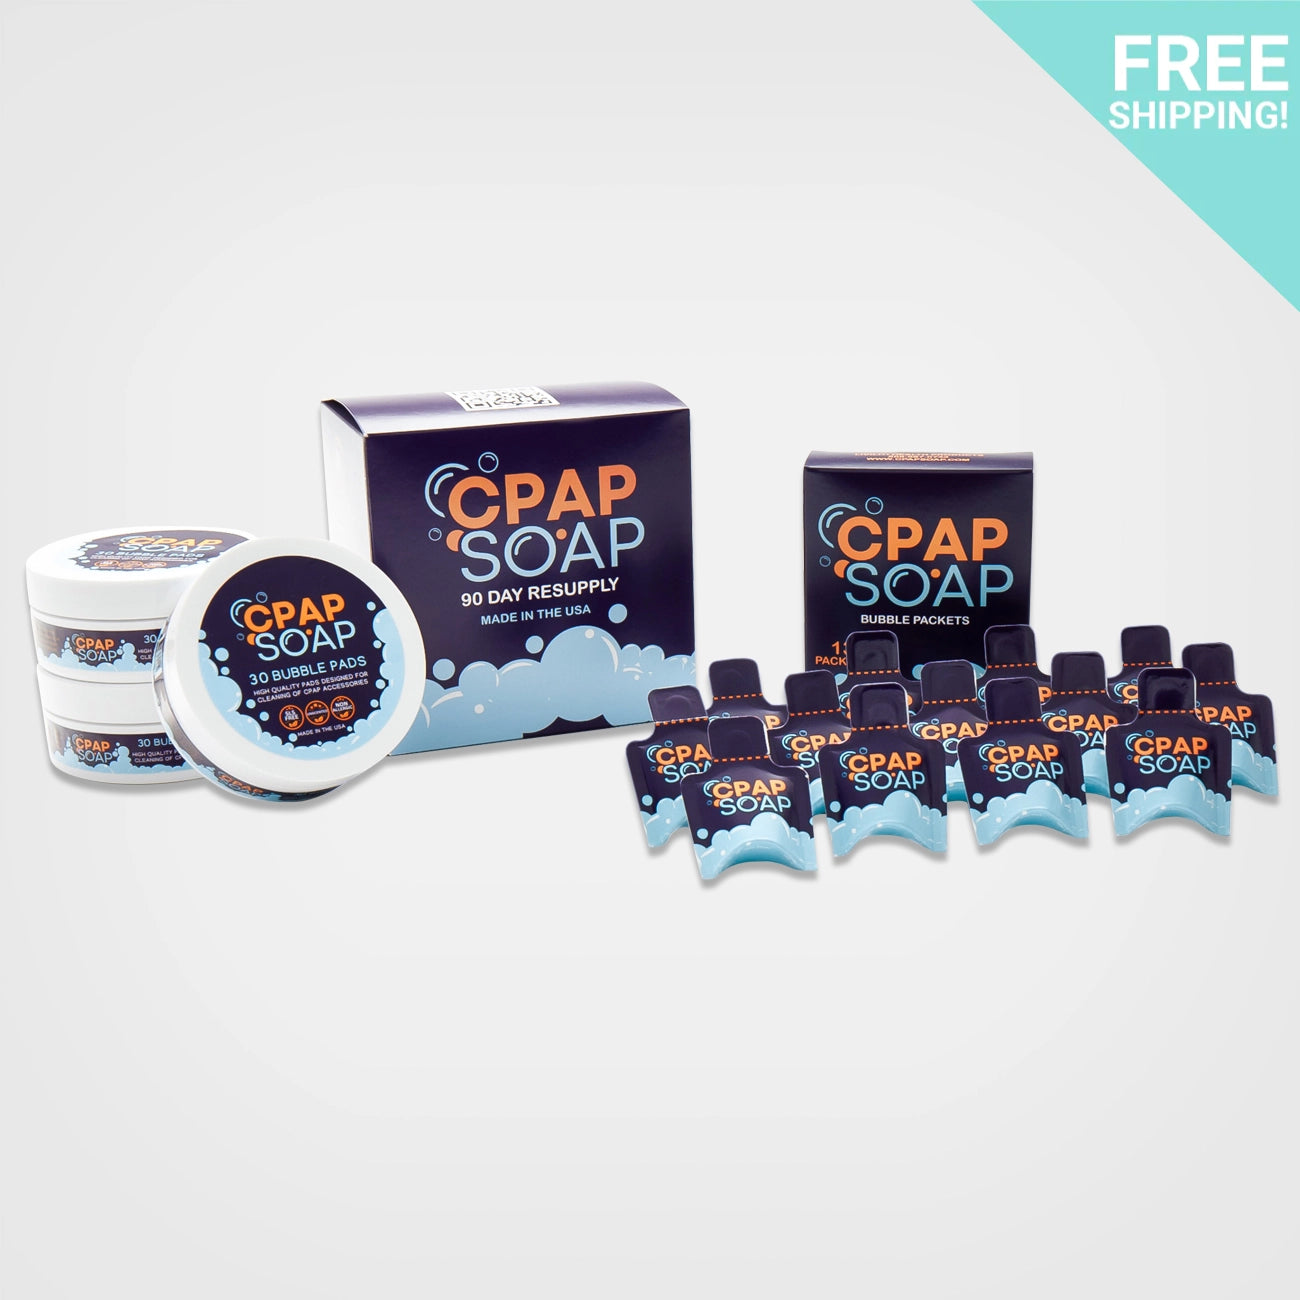 CPAP Soap™ Cleaning Kit - 6 Month Supply